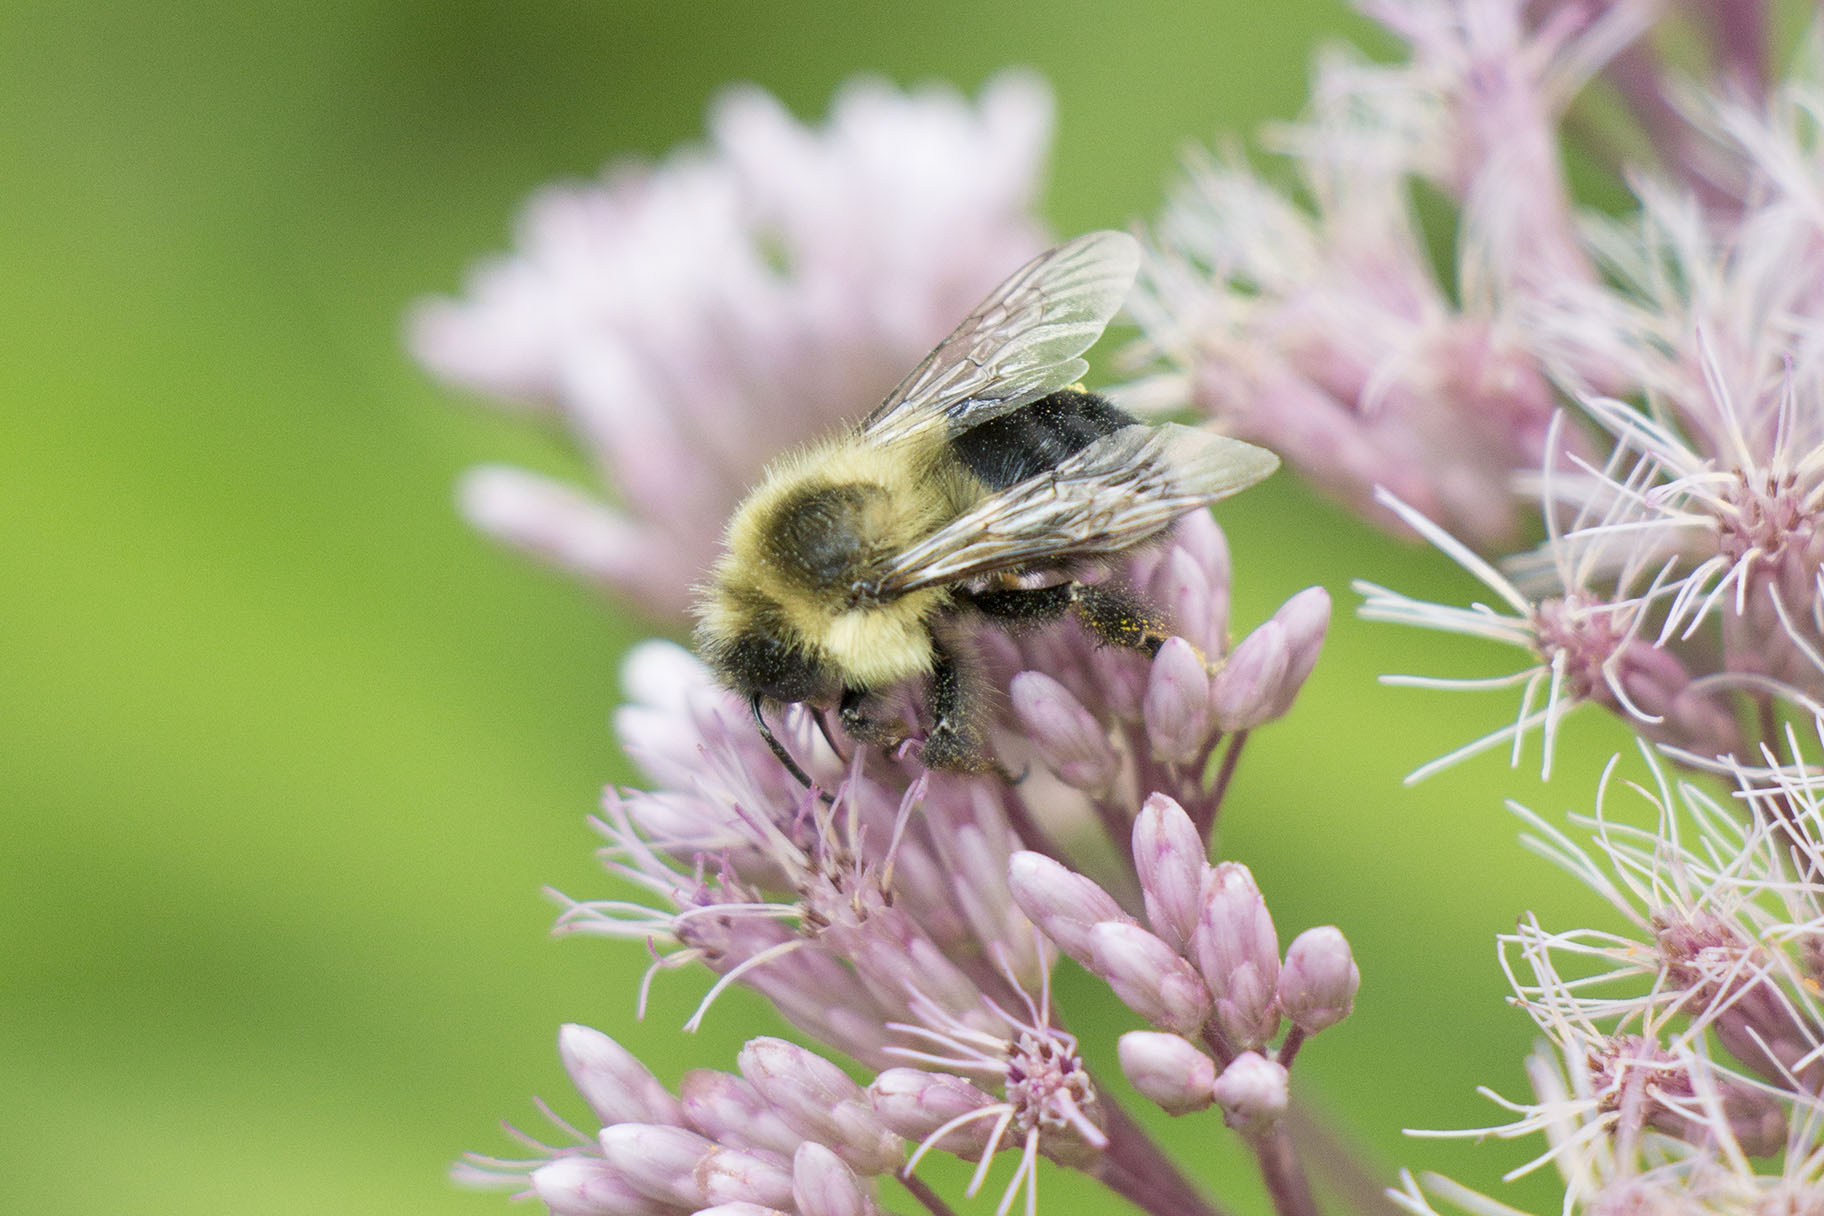 A hairy, yellow-and-black bumble bee forages on a pink flower head of joe-pye weed.